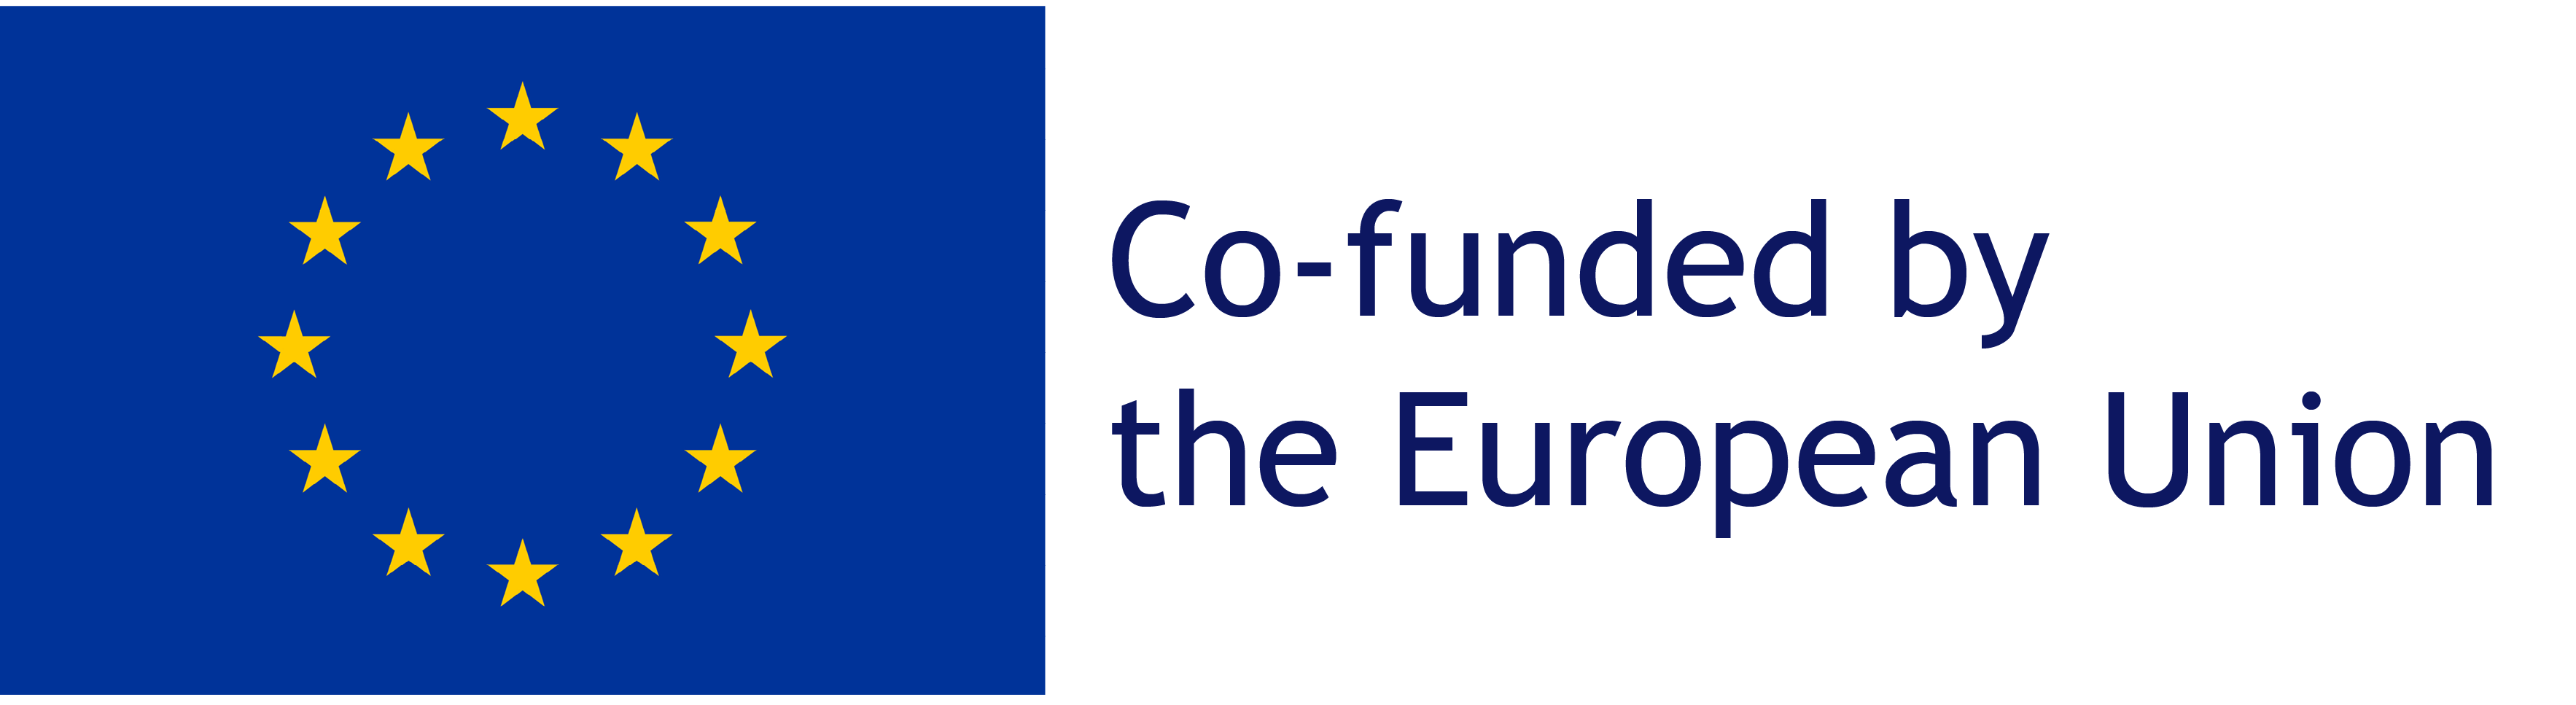 Co-Funded_by_the_EU_logo.png